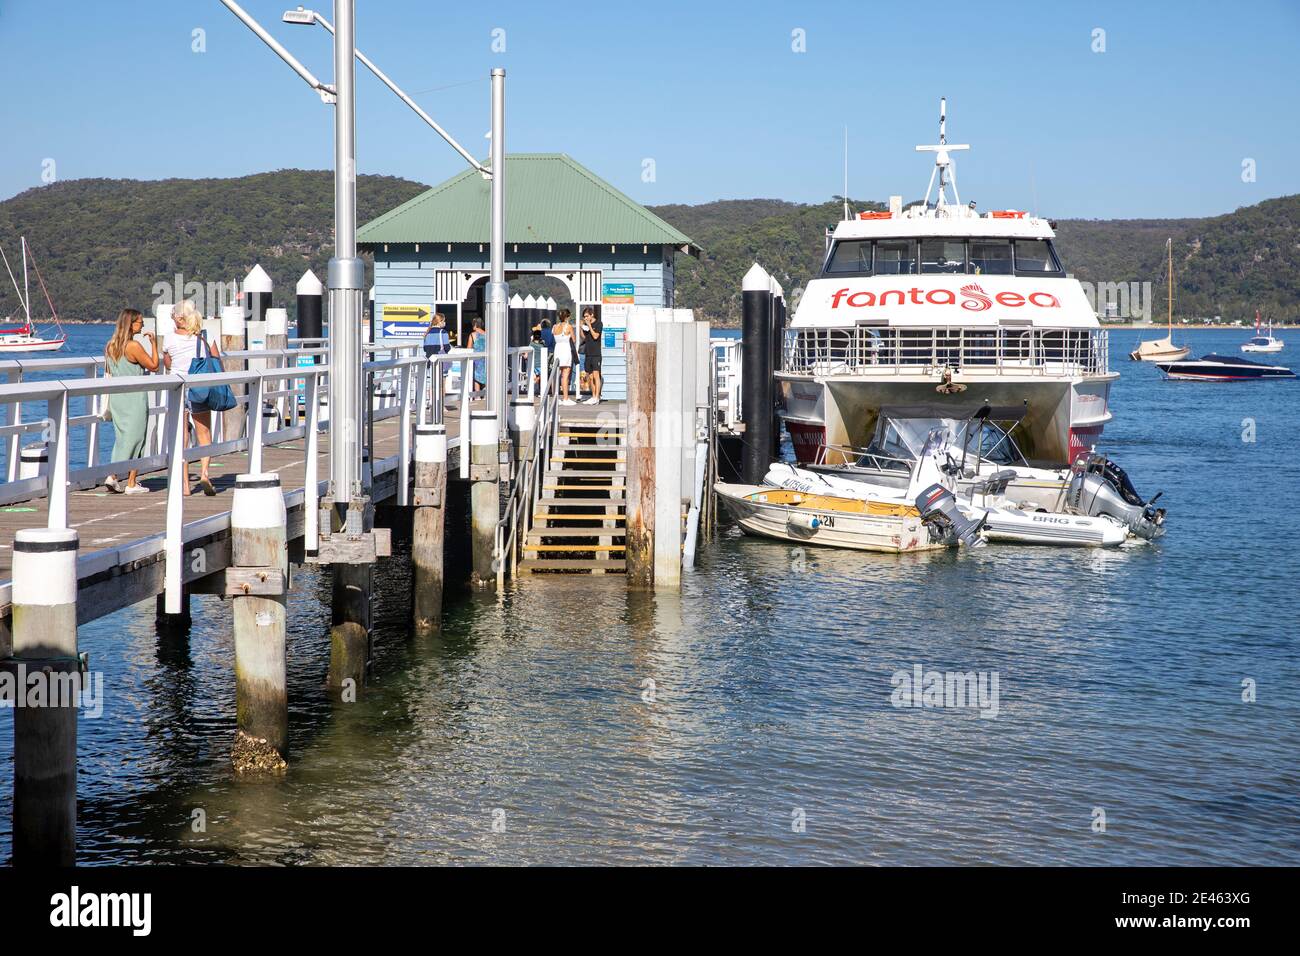 Palm Beach ferry wharf on Pittwater in Sydney northern beaches with passengers waiting to board Fantasea ferry boat,Sydney,NSW,Australia Stock Photo